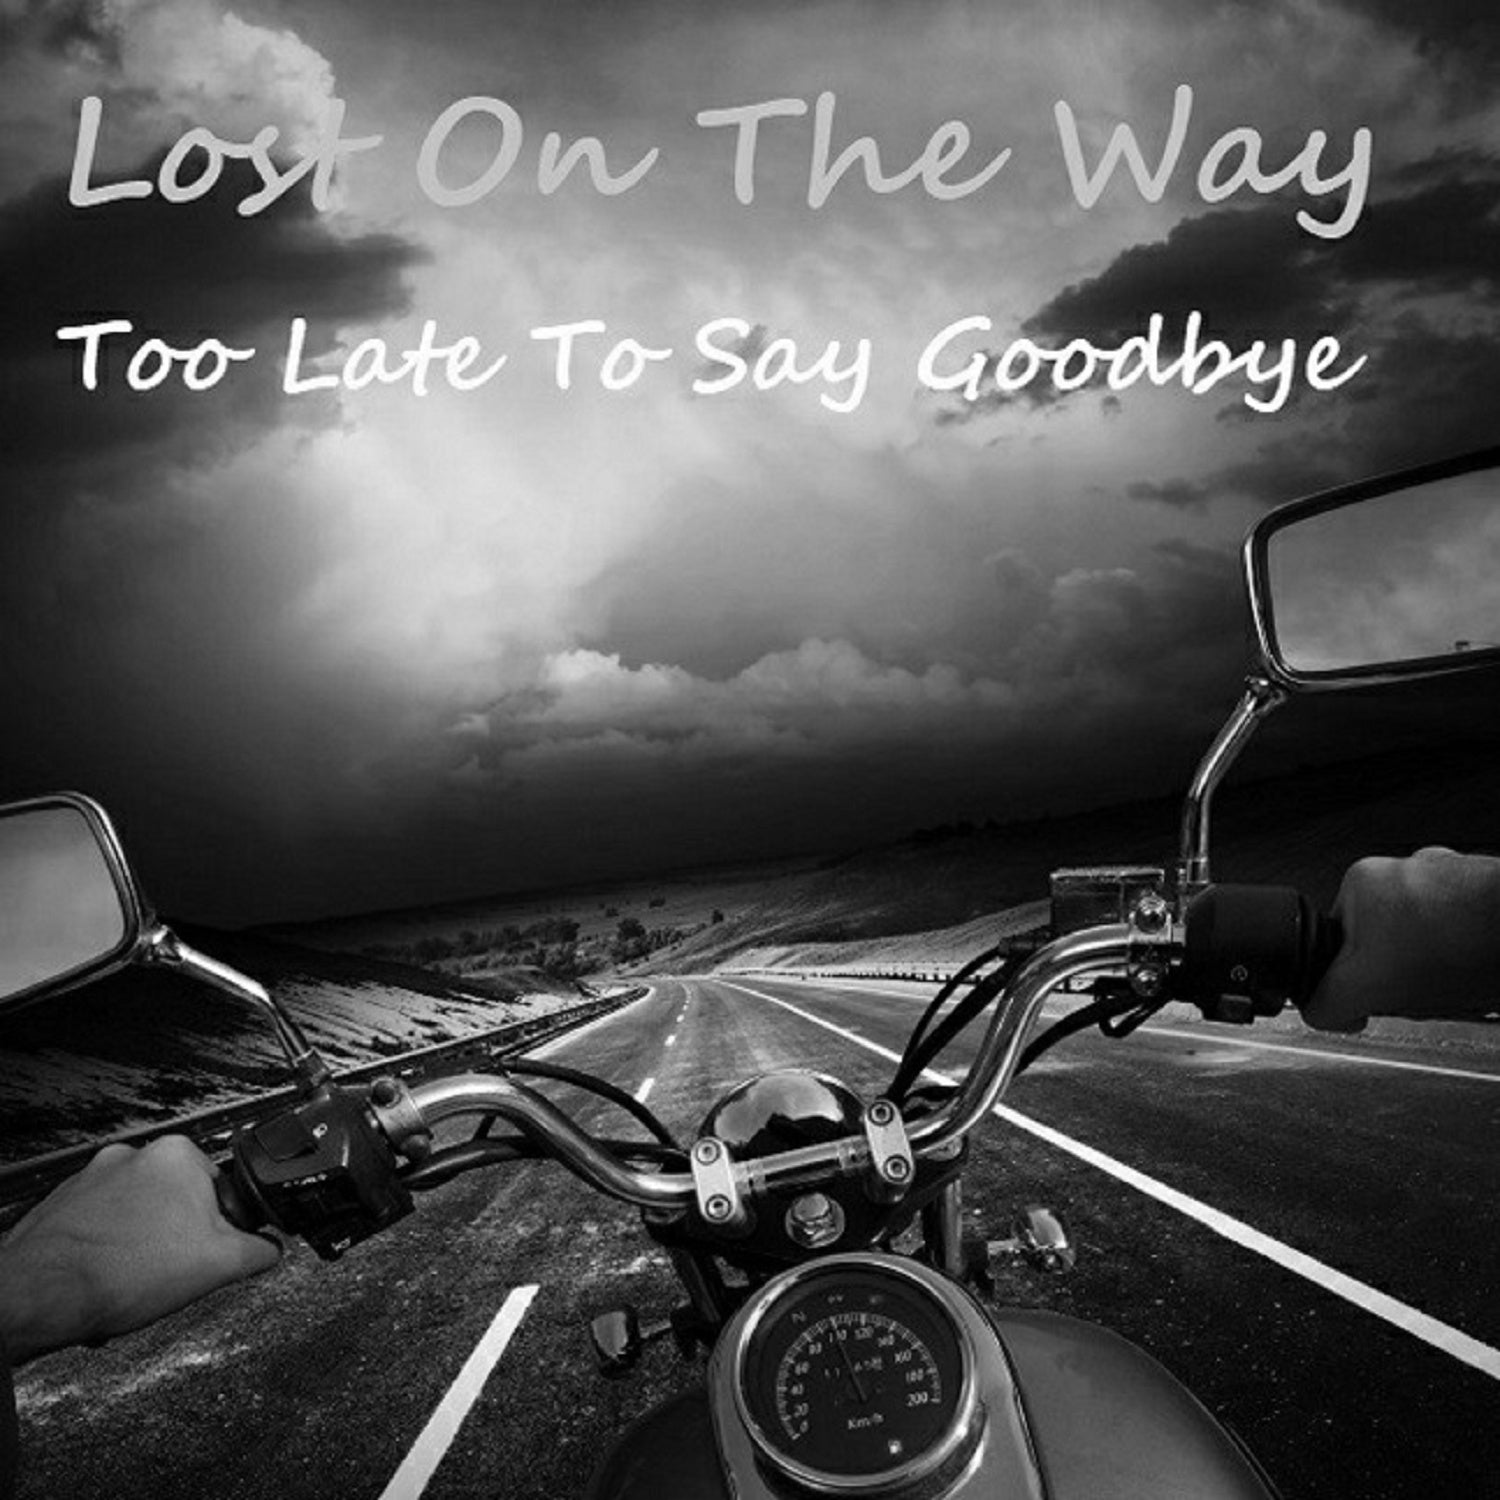 Lost On The Way – ‘Too Late To Say Goodbye’